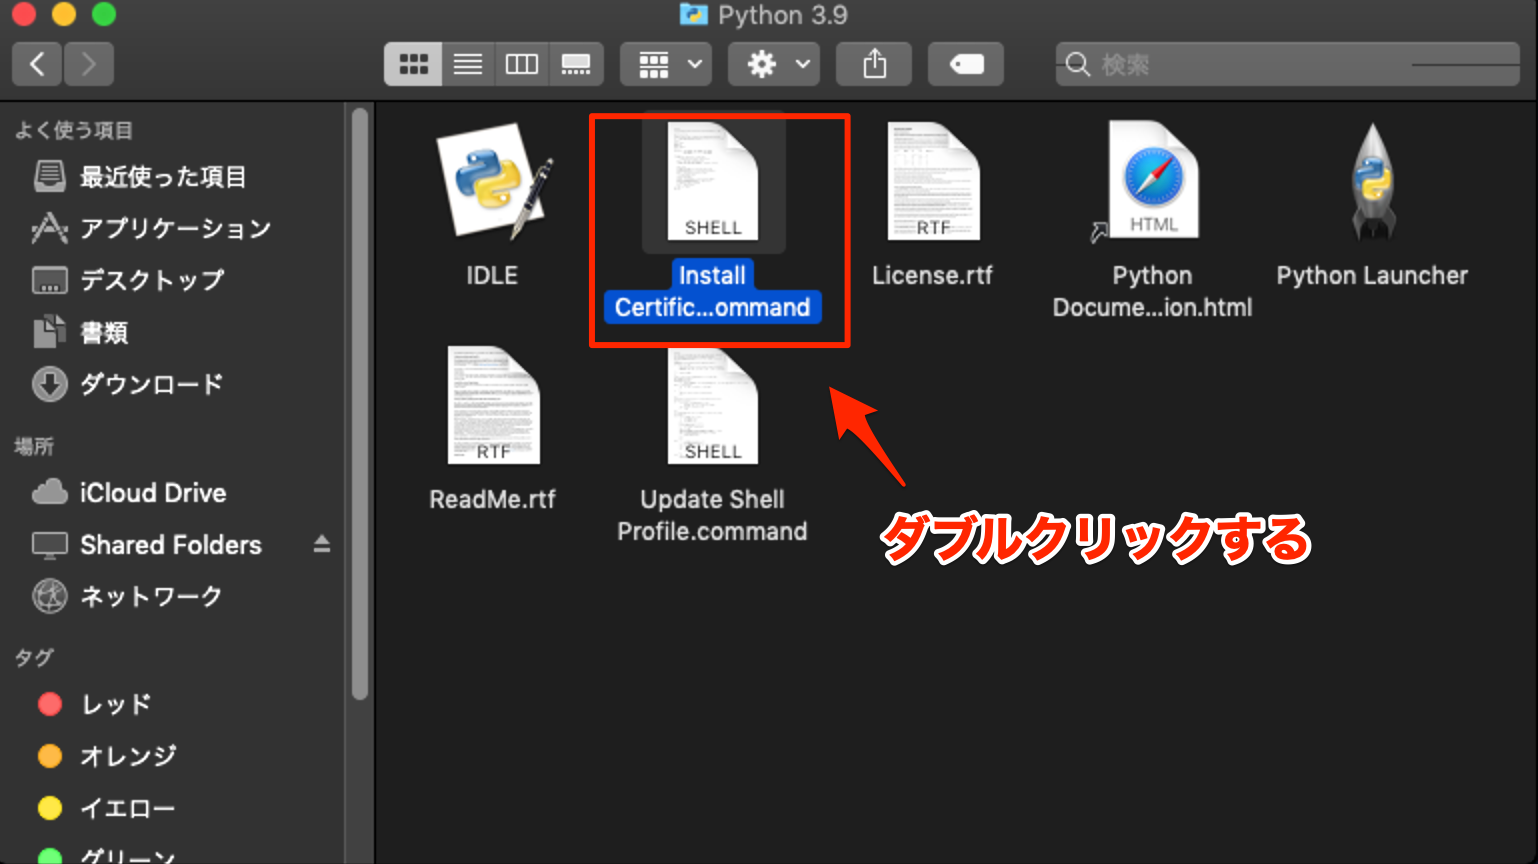 Install Certificates.commandを実行